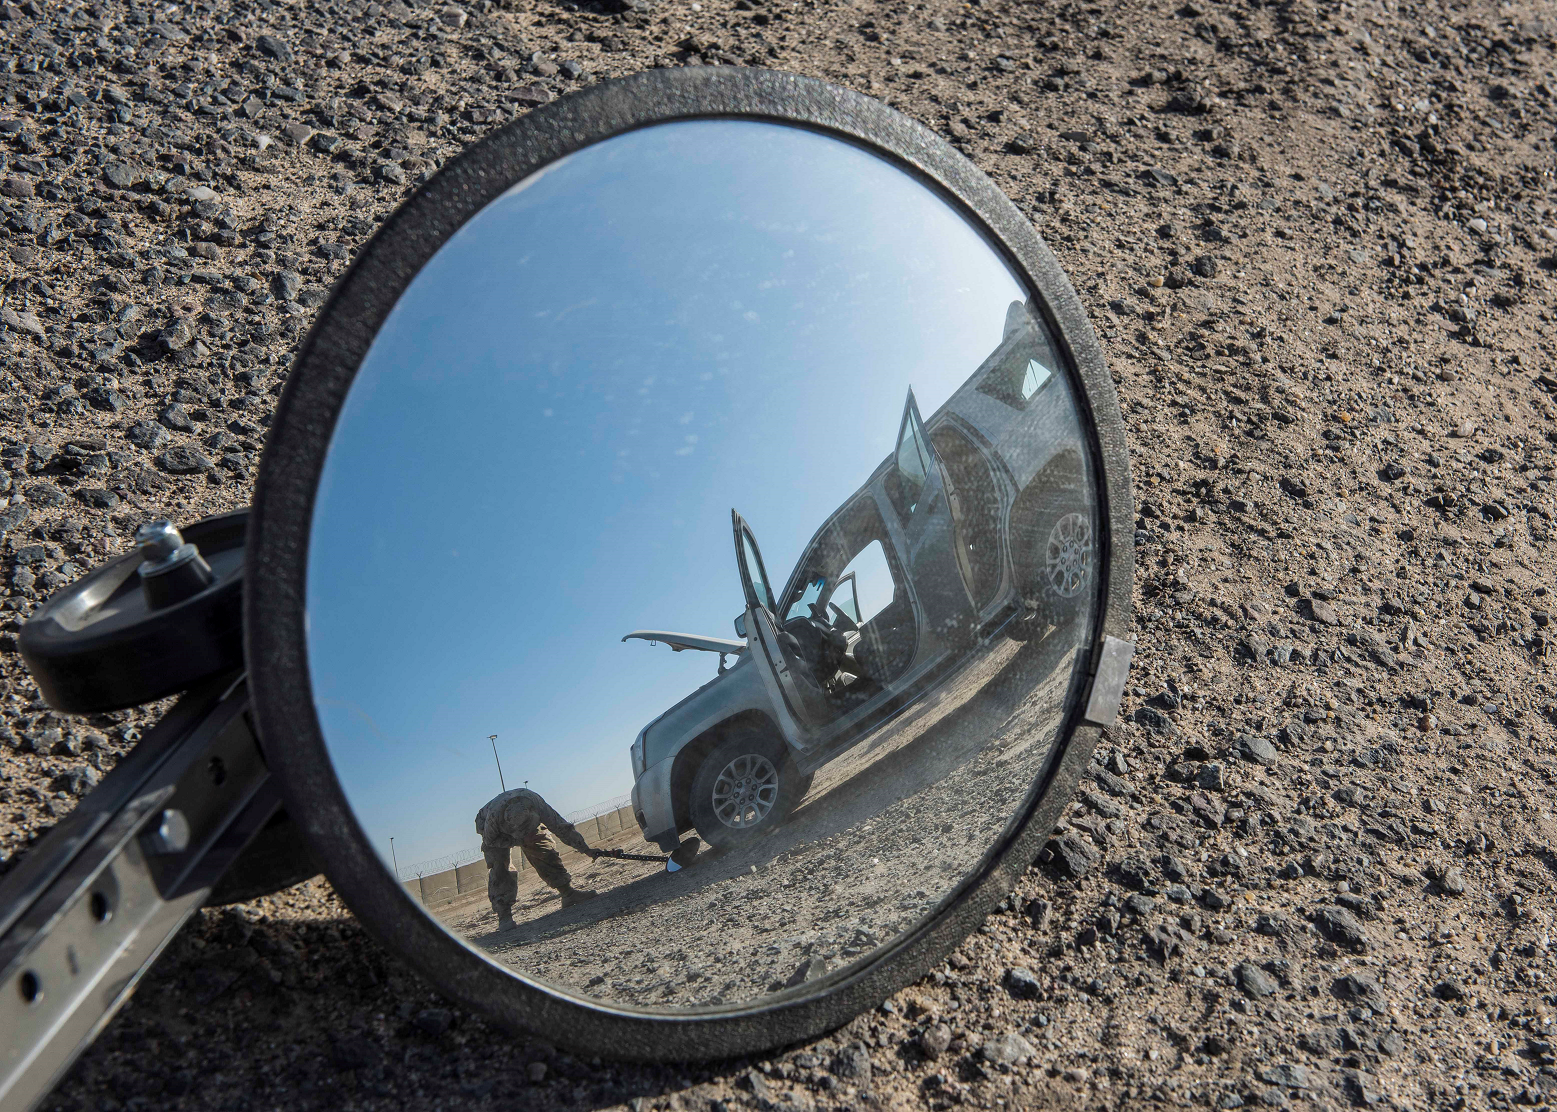 A Canadian Armed forces member of Joint Task force-Iraq searches a vehicle during Operation IMPACT at Camp Canada, Kuwait on December 15, 2016. (Photo: Op Impact, DND)